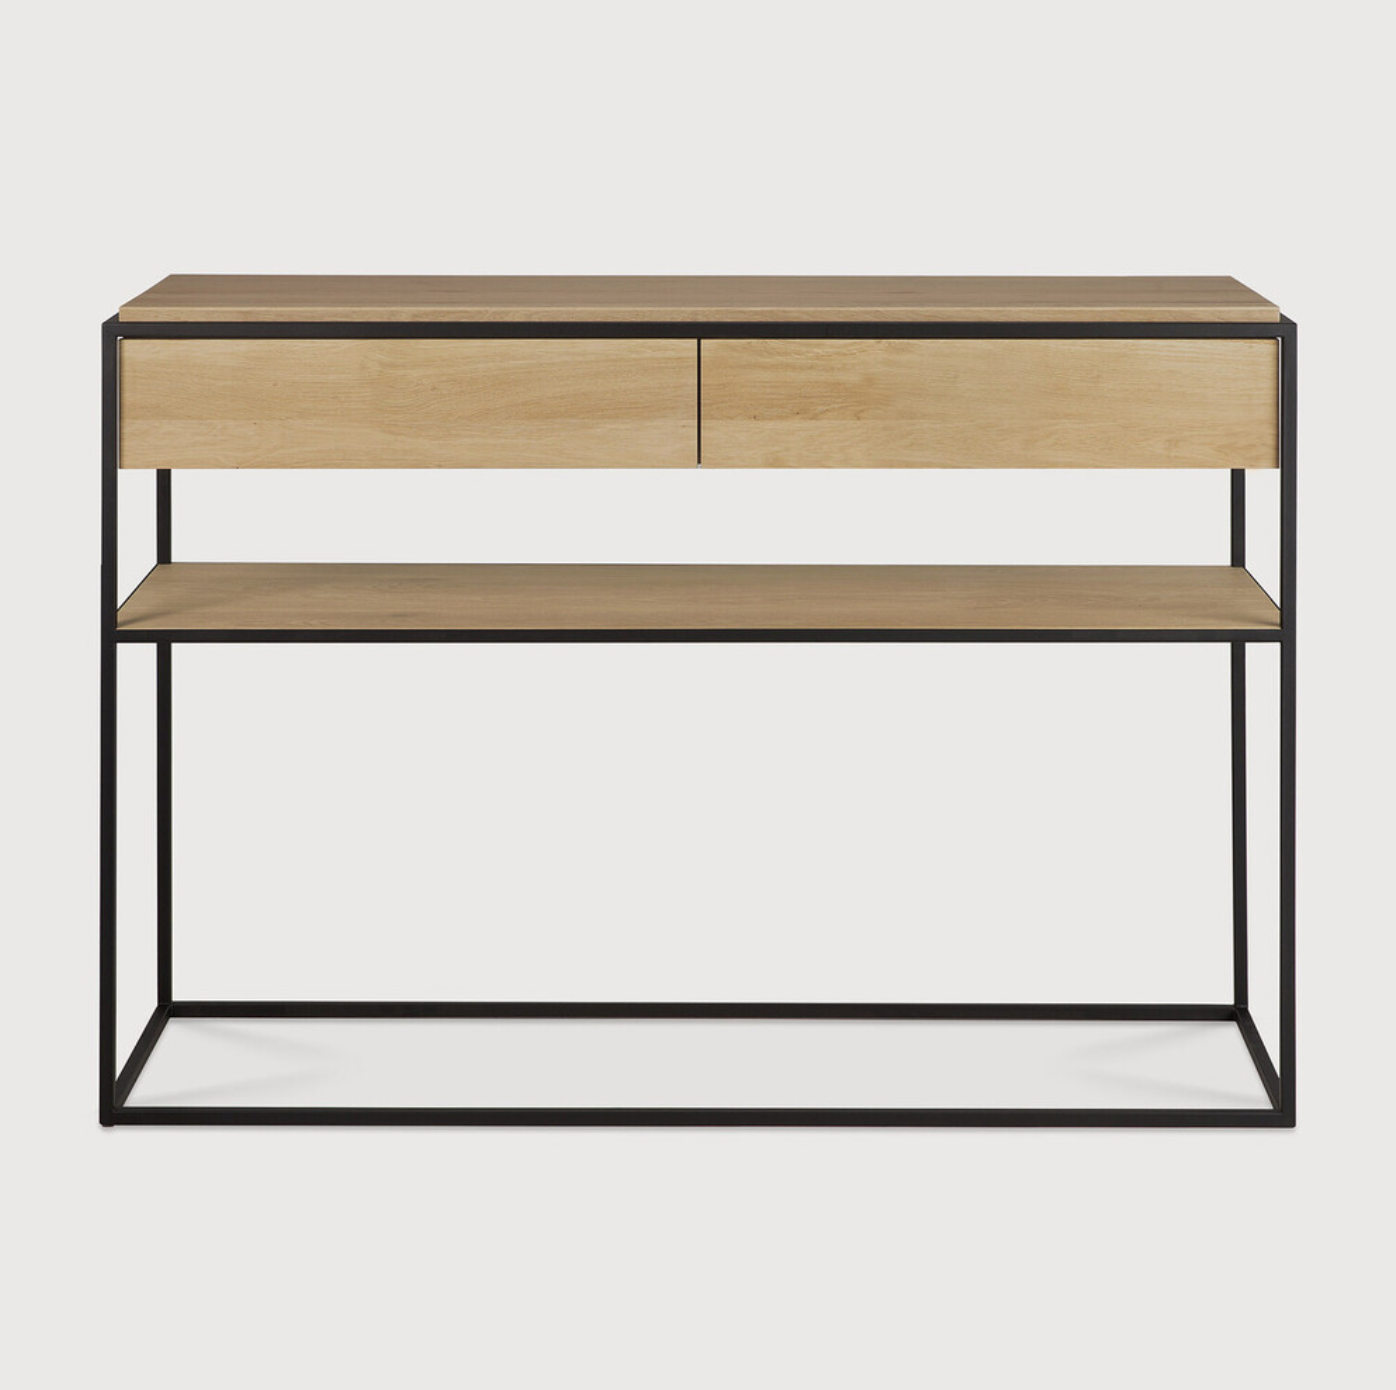 Balance and function come together in the Monolit console table. This simple, sleek table includes storage and we LOVE hidden storage! Dress up your living room or office with a piece that is both functional and stylish!  Dimensions: 48.5"w x 16"d x 33.5"h  Weight: 77 lbs  Material: Oak, 100% solid wood Finish: Oiled